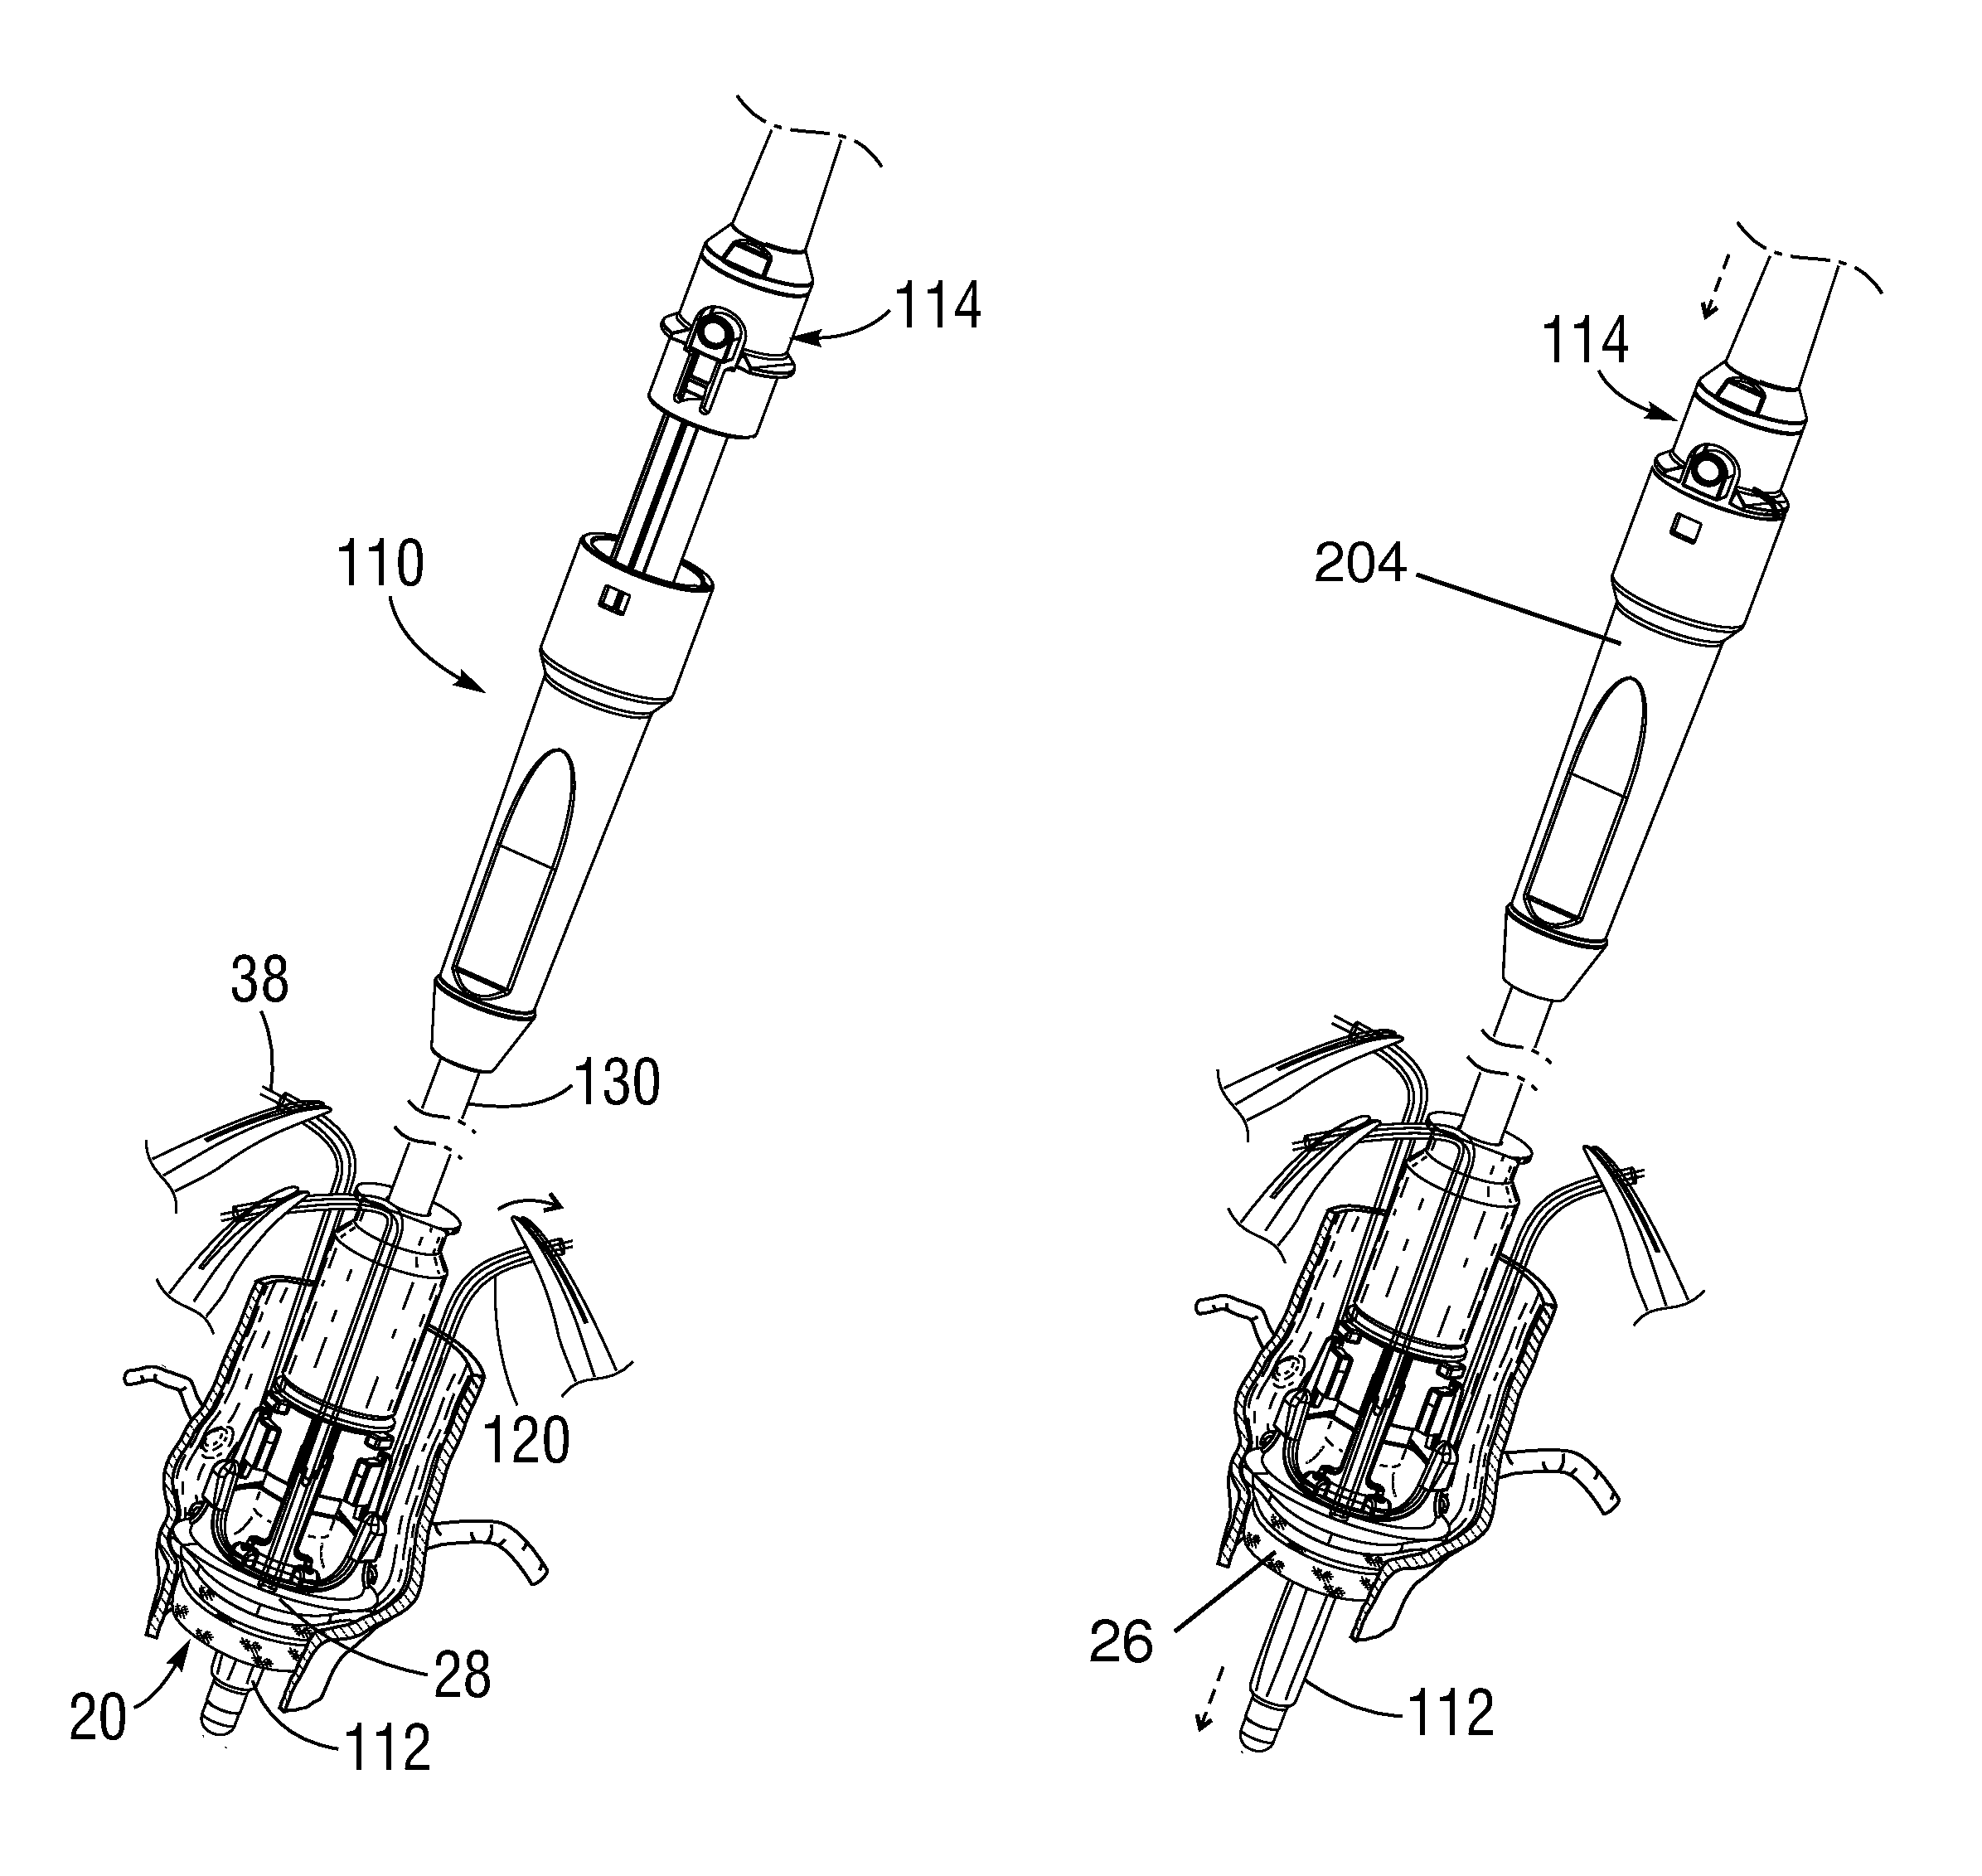 Systems and methods for ensuring safe and rapid deployment of prosthetic heart valves